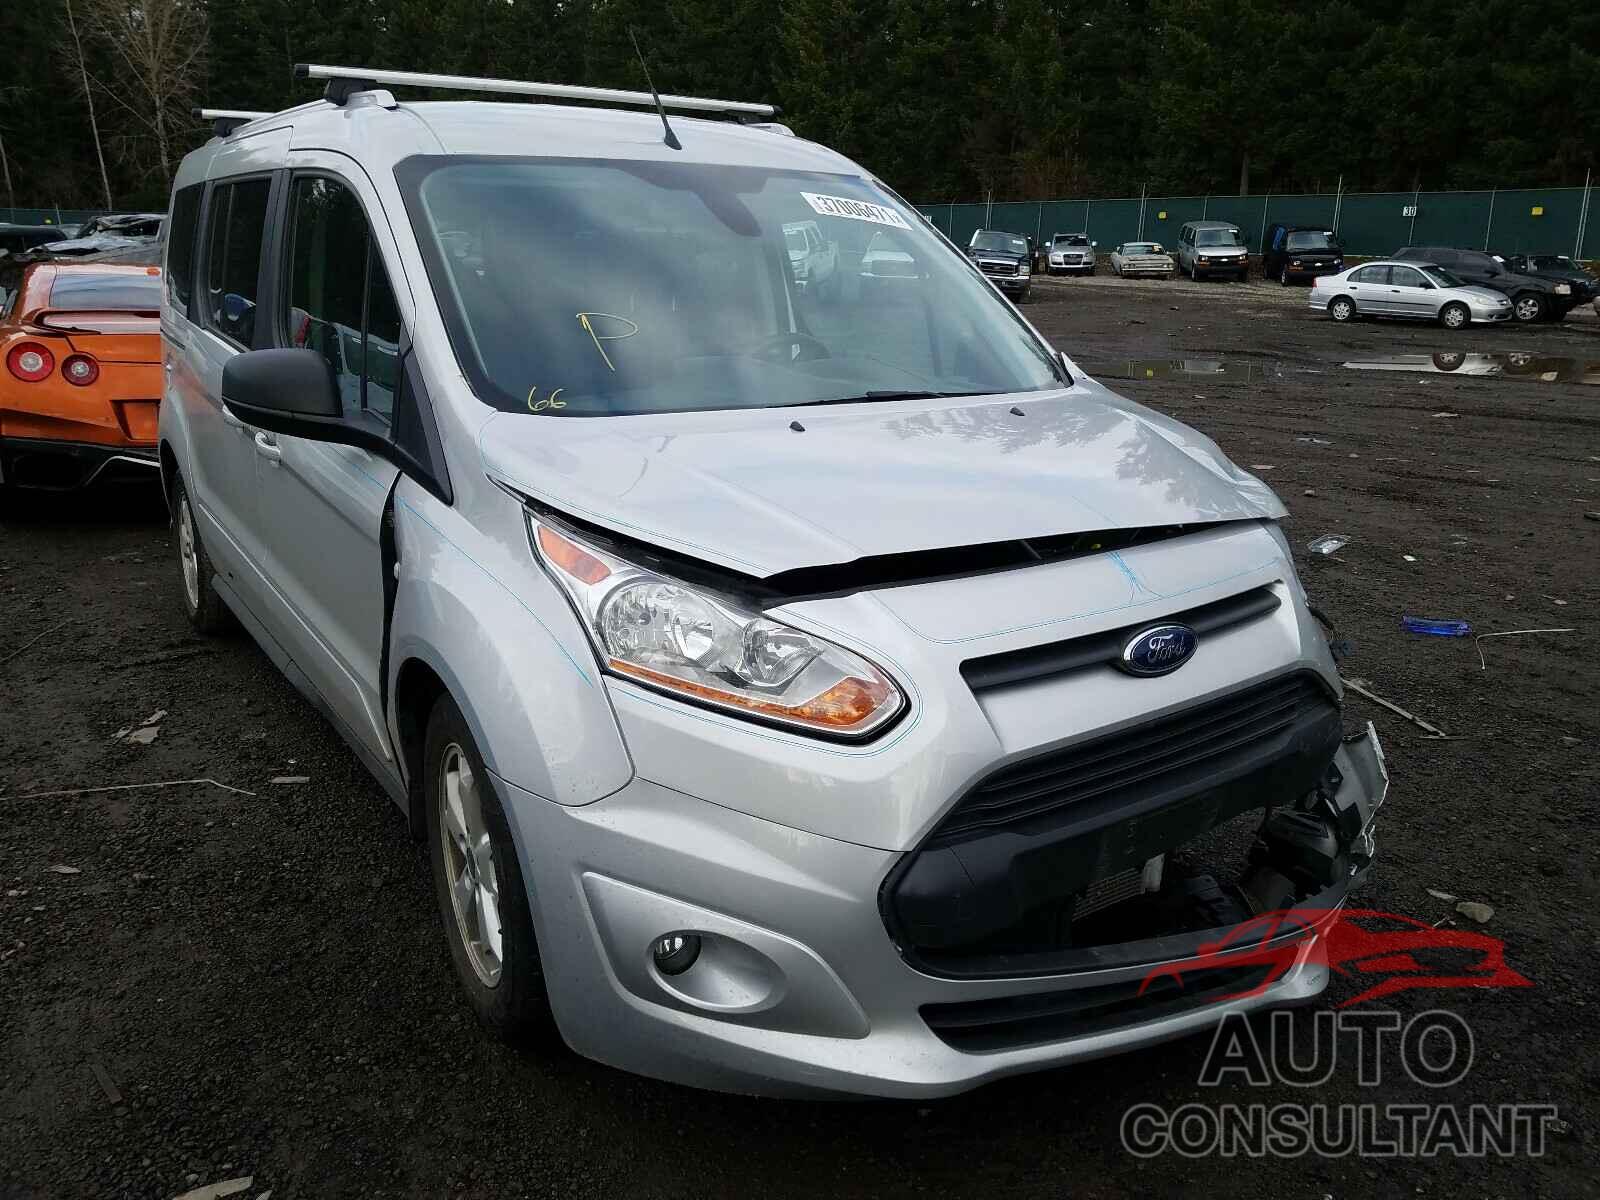 FORD TRANSIT CO 2017 - NM0GS9F72H1312020